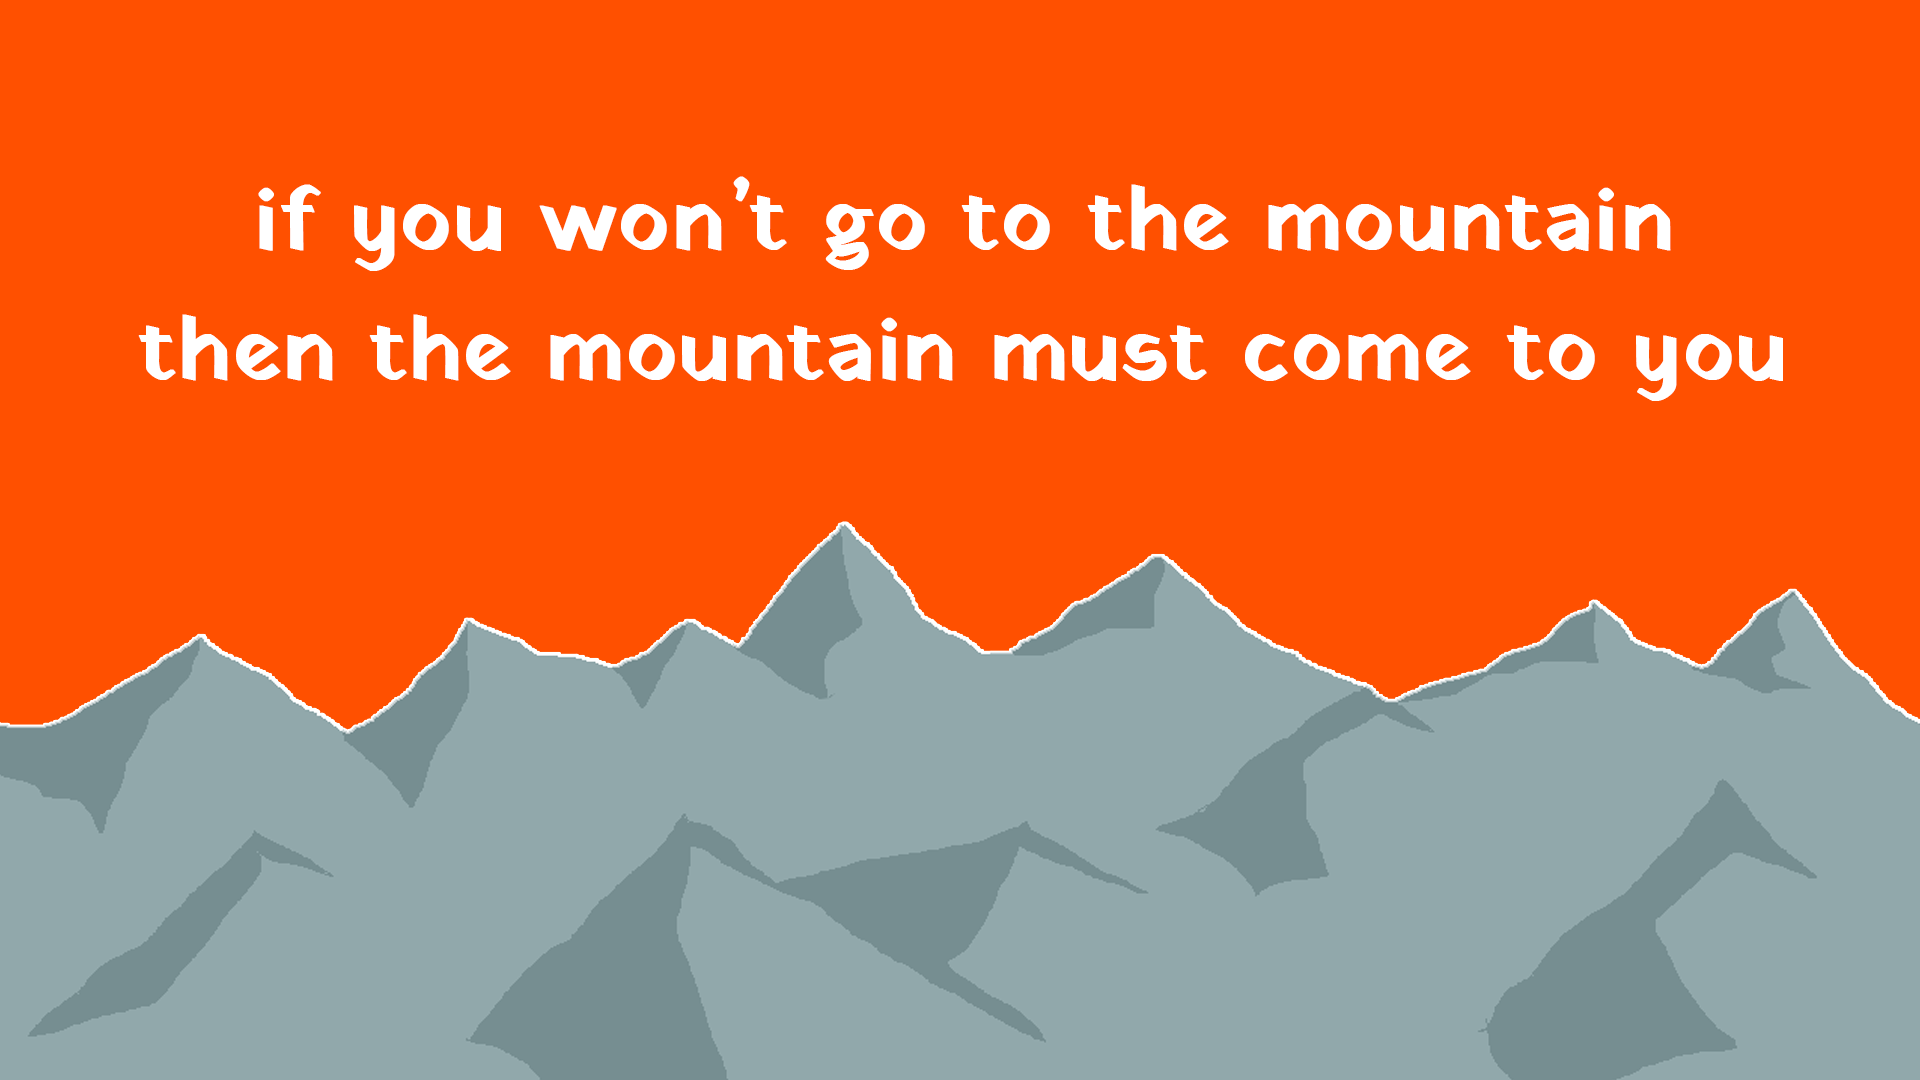 if you won't go to the mountain then the mountain must come to you